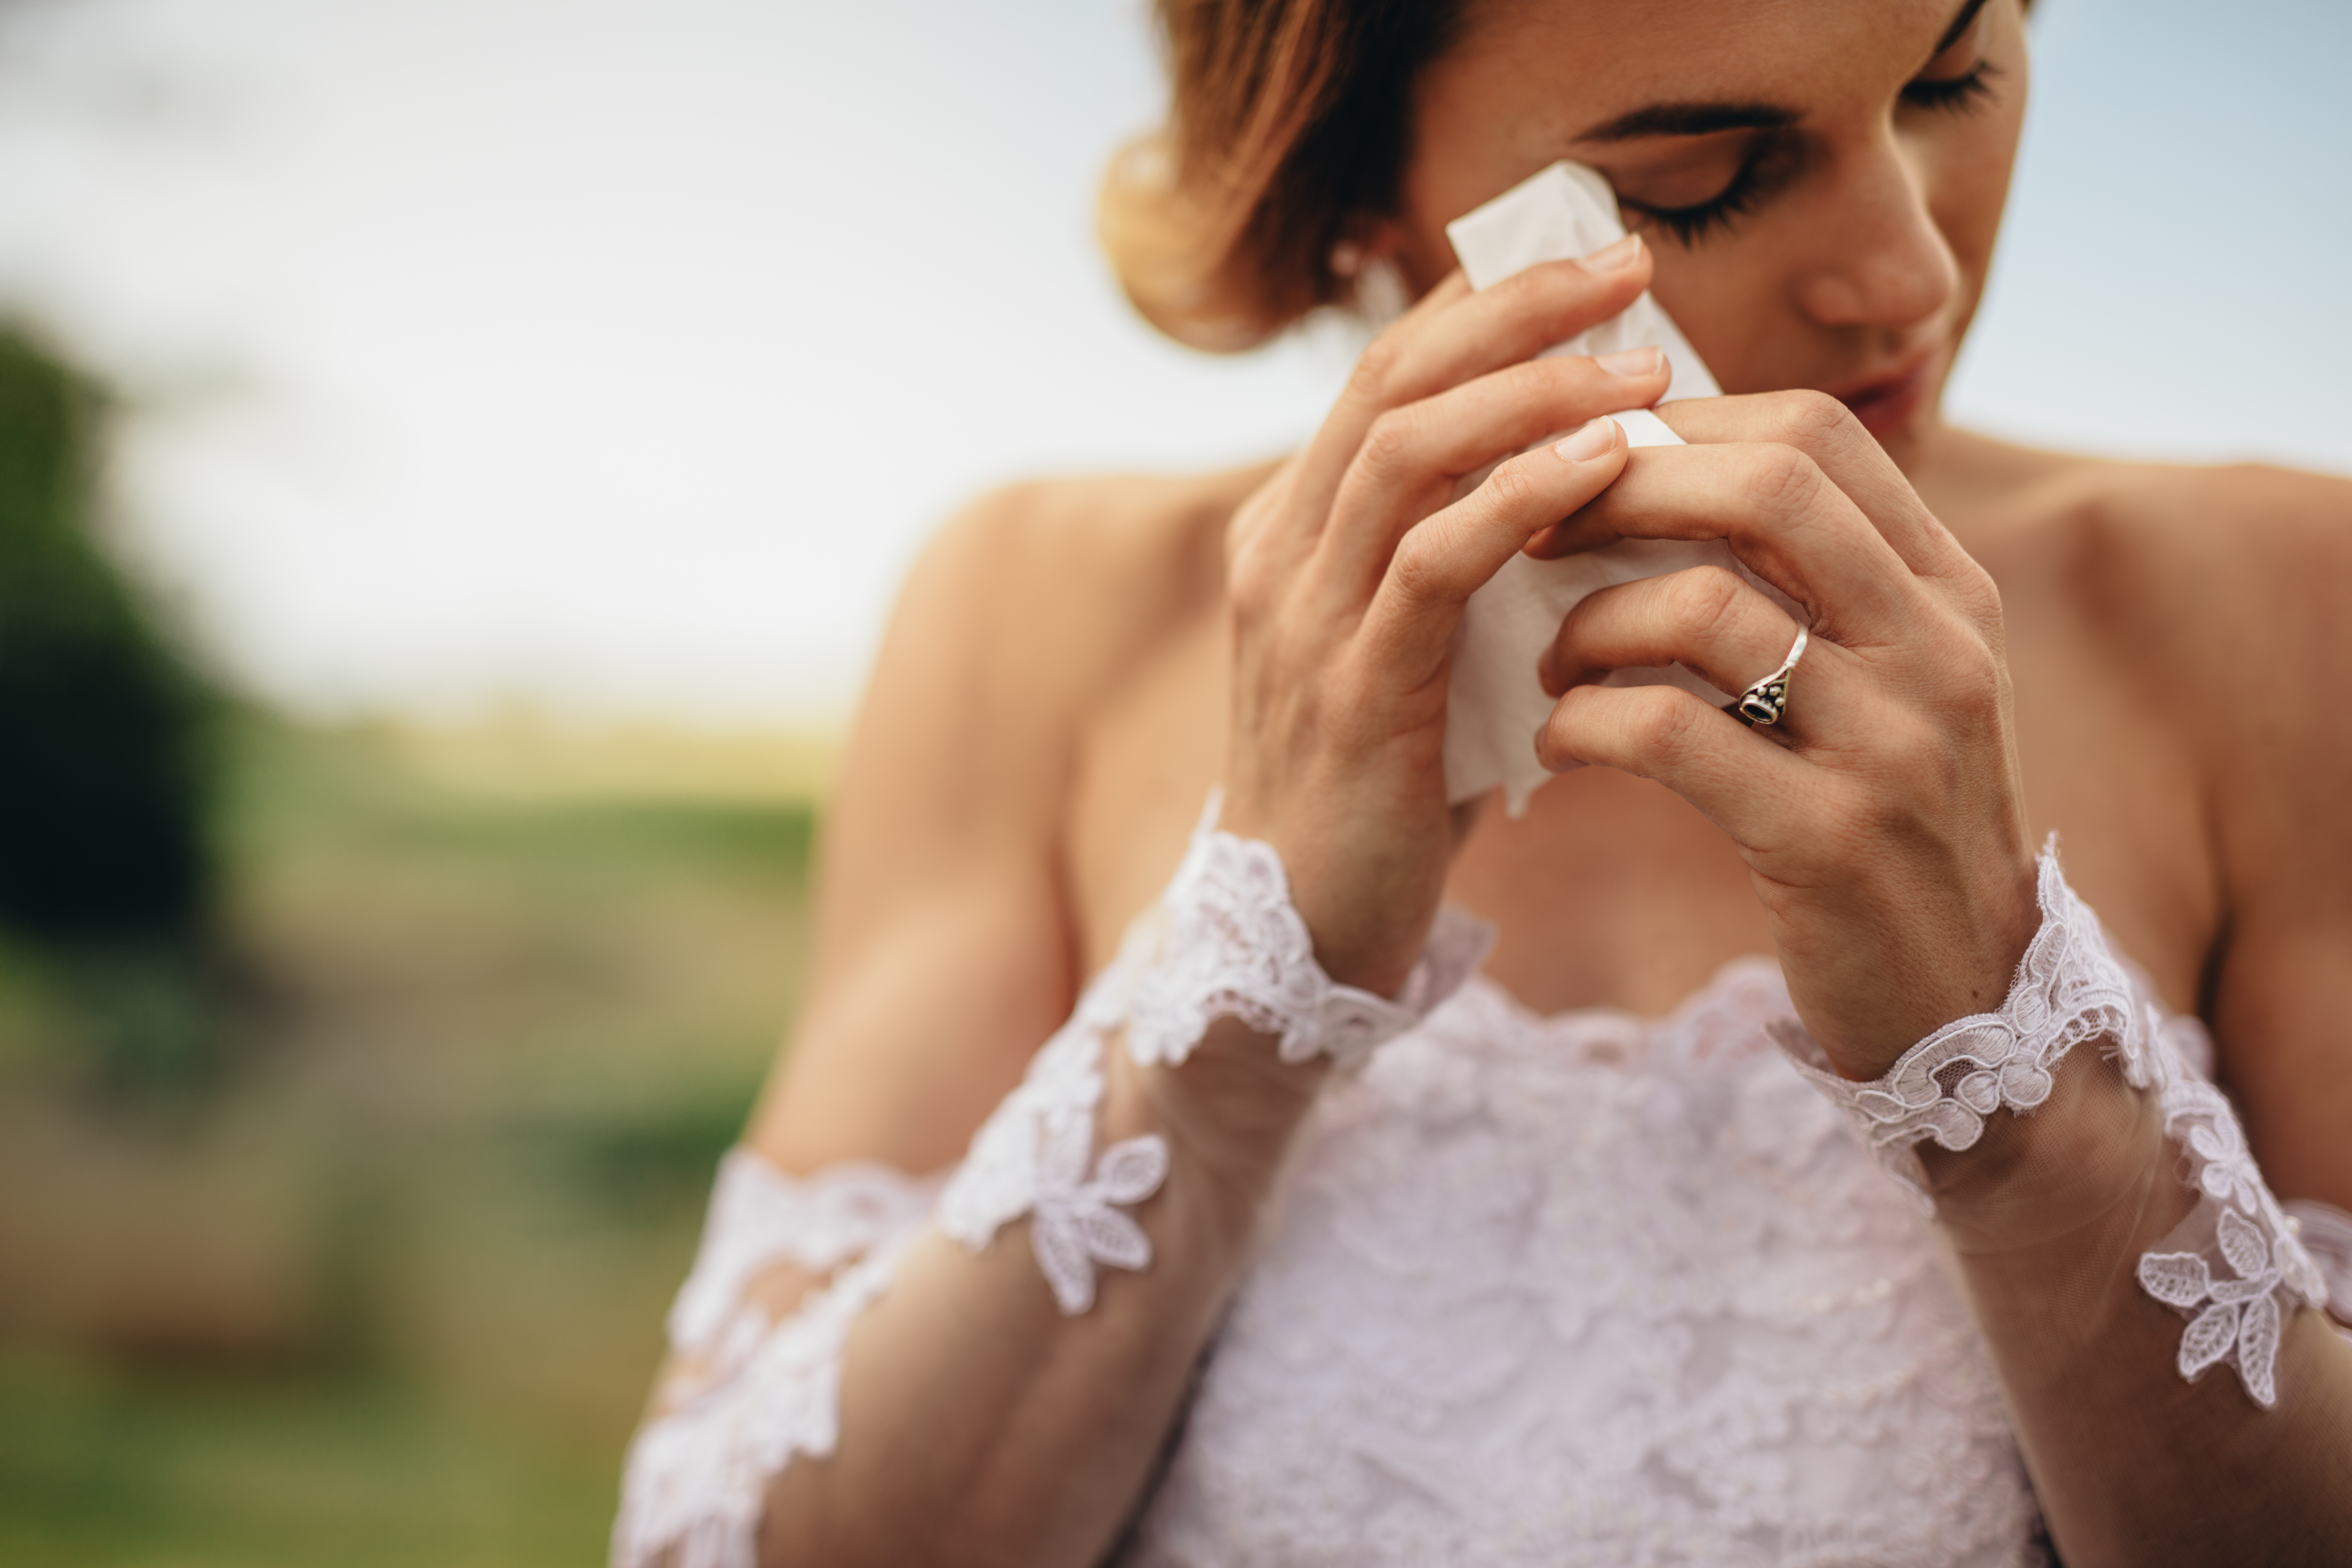 A bride crying on her big day | Source: Shutterstock